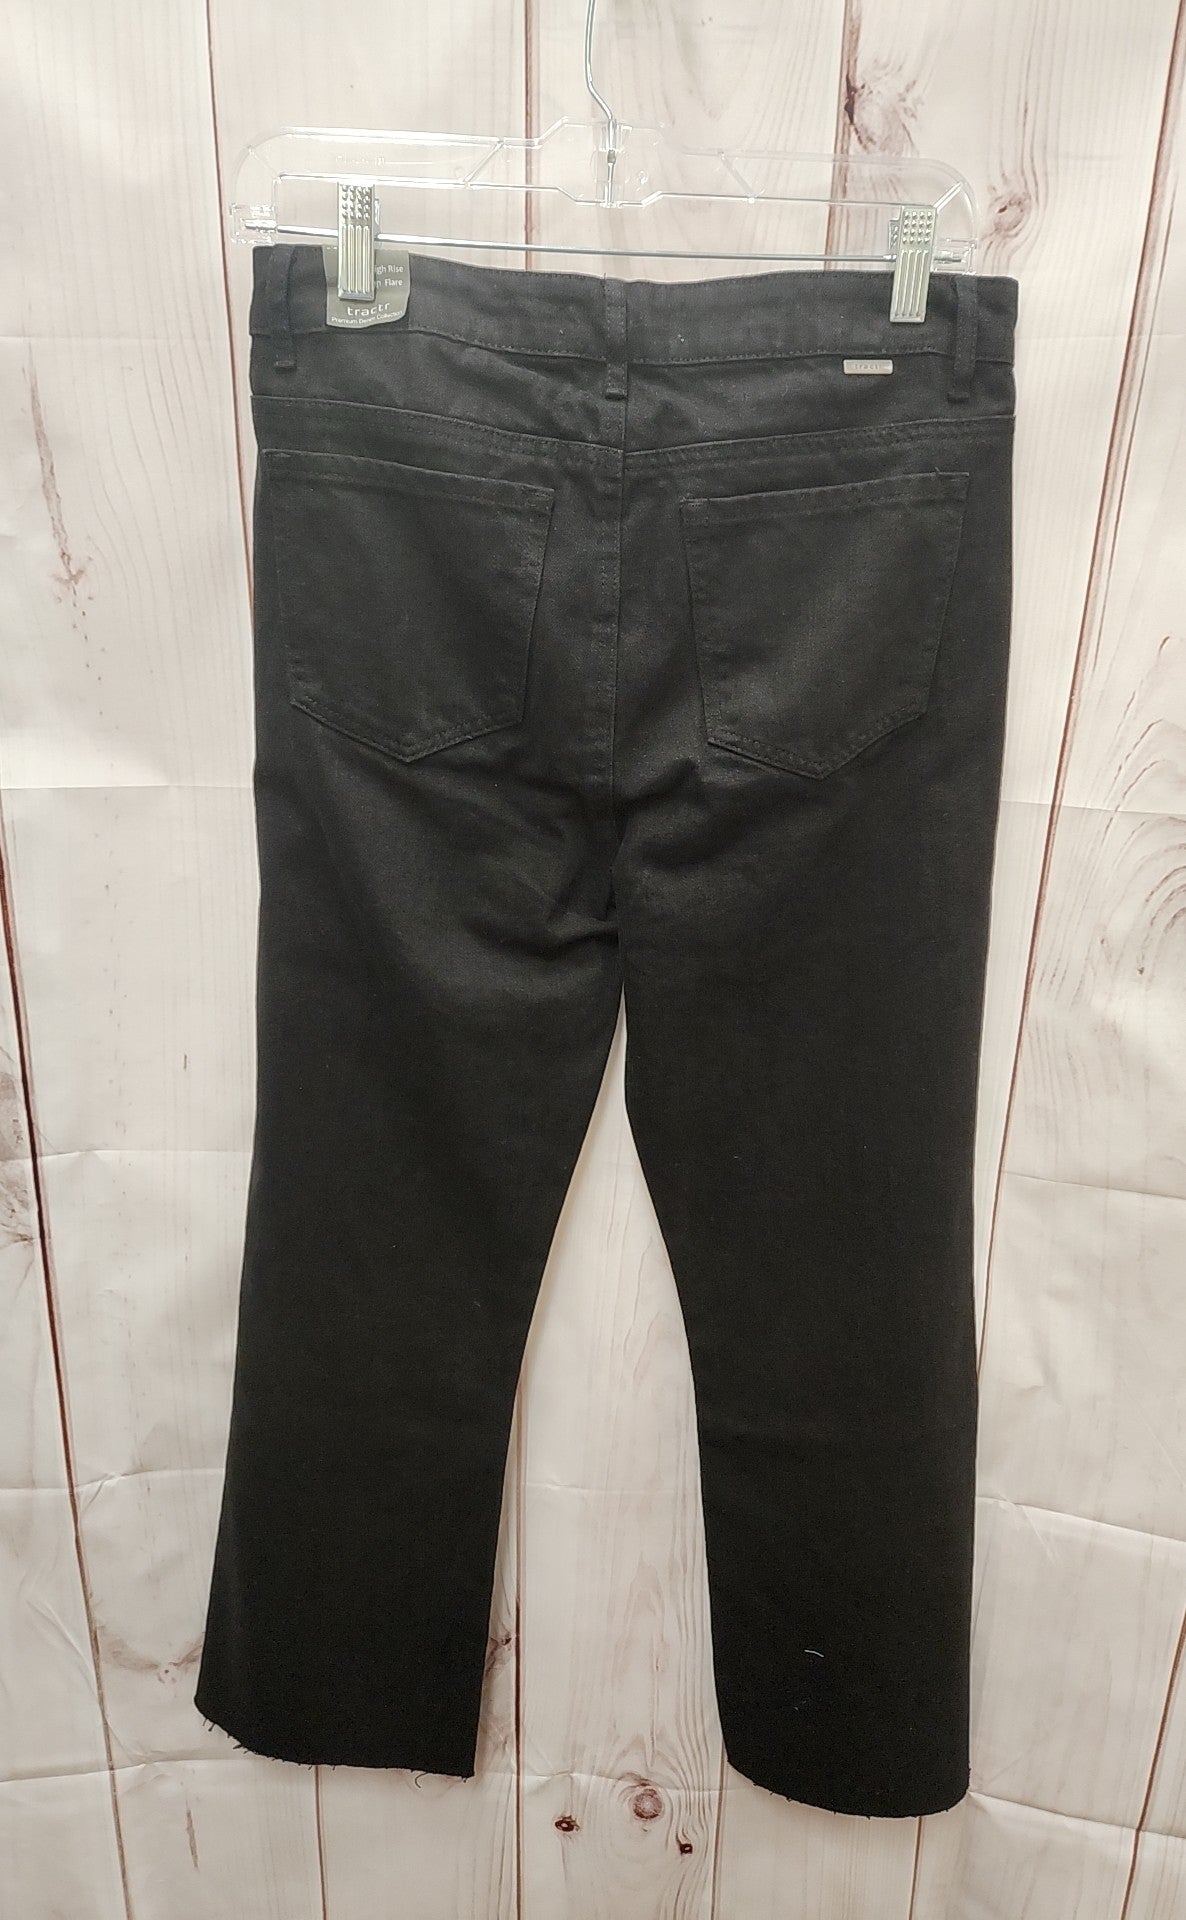 Tractr Women's Size 28 (5-6) Ultra High Crop Flare Black Jeans